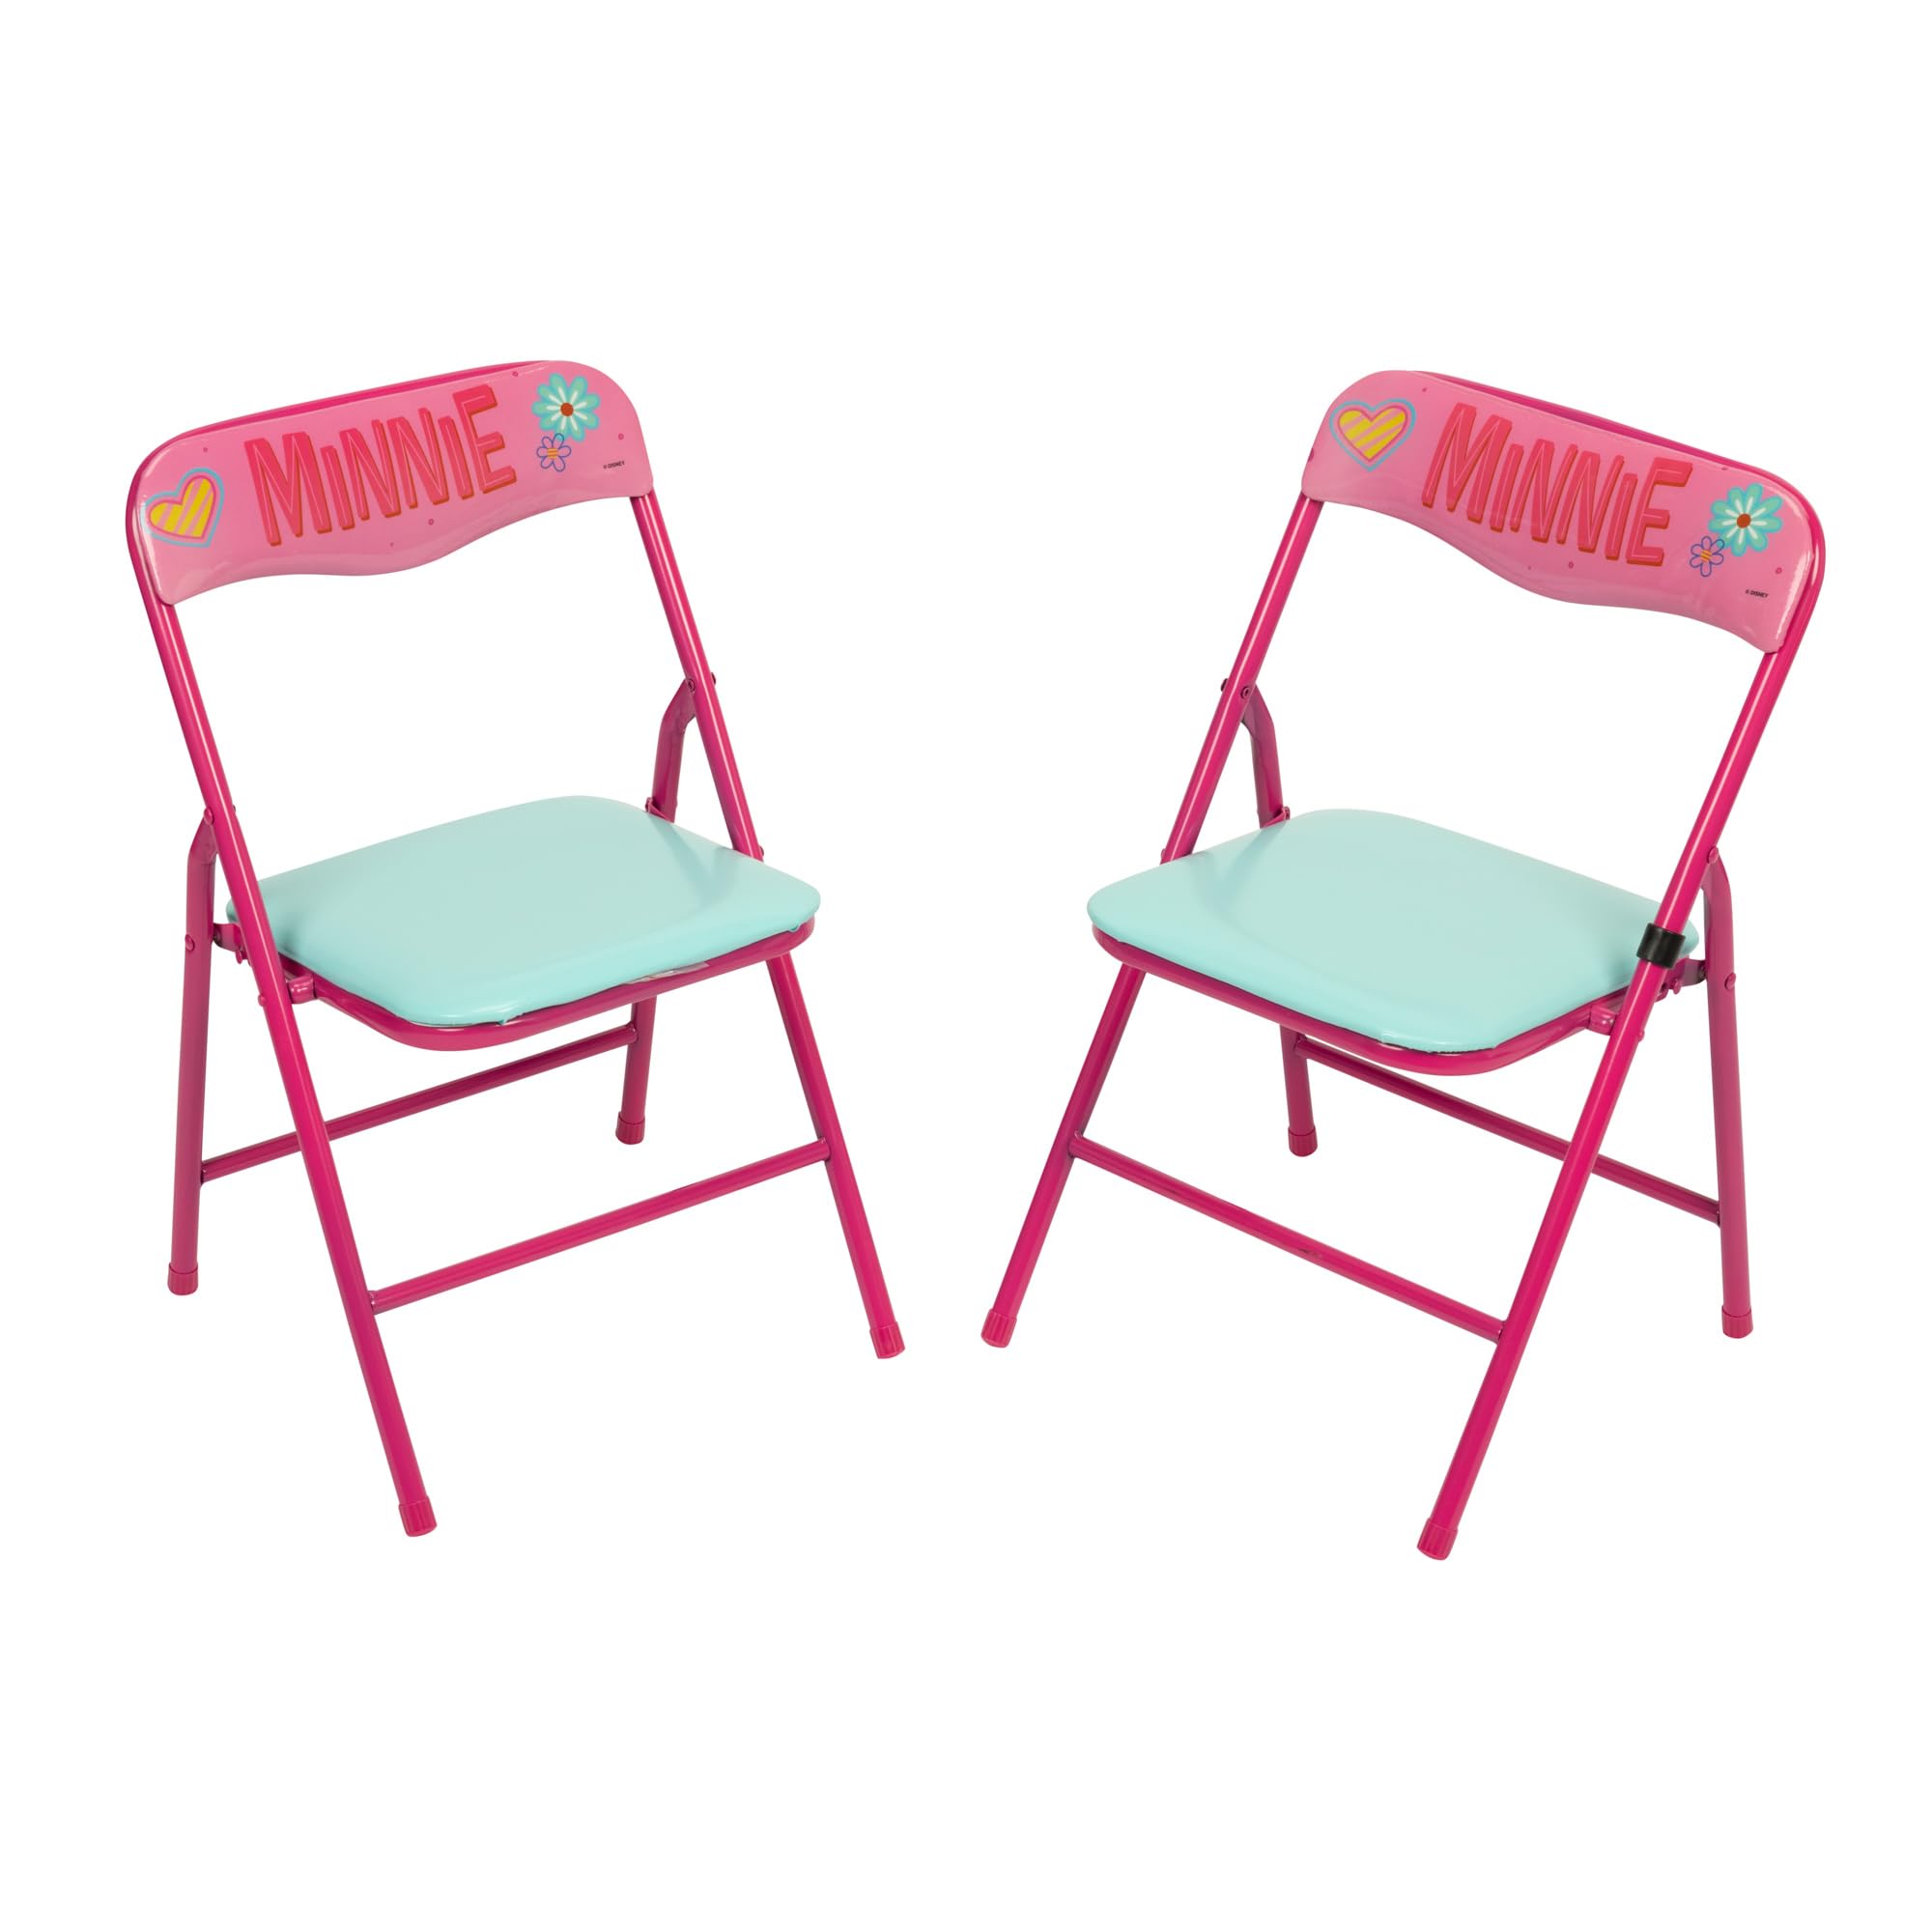 Minnie Mouse Kids Table & Chairs Set for Kid and Toddler 36 Months Up To 7 years, Includes: 1 Table (24